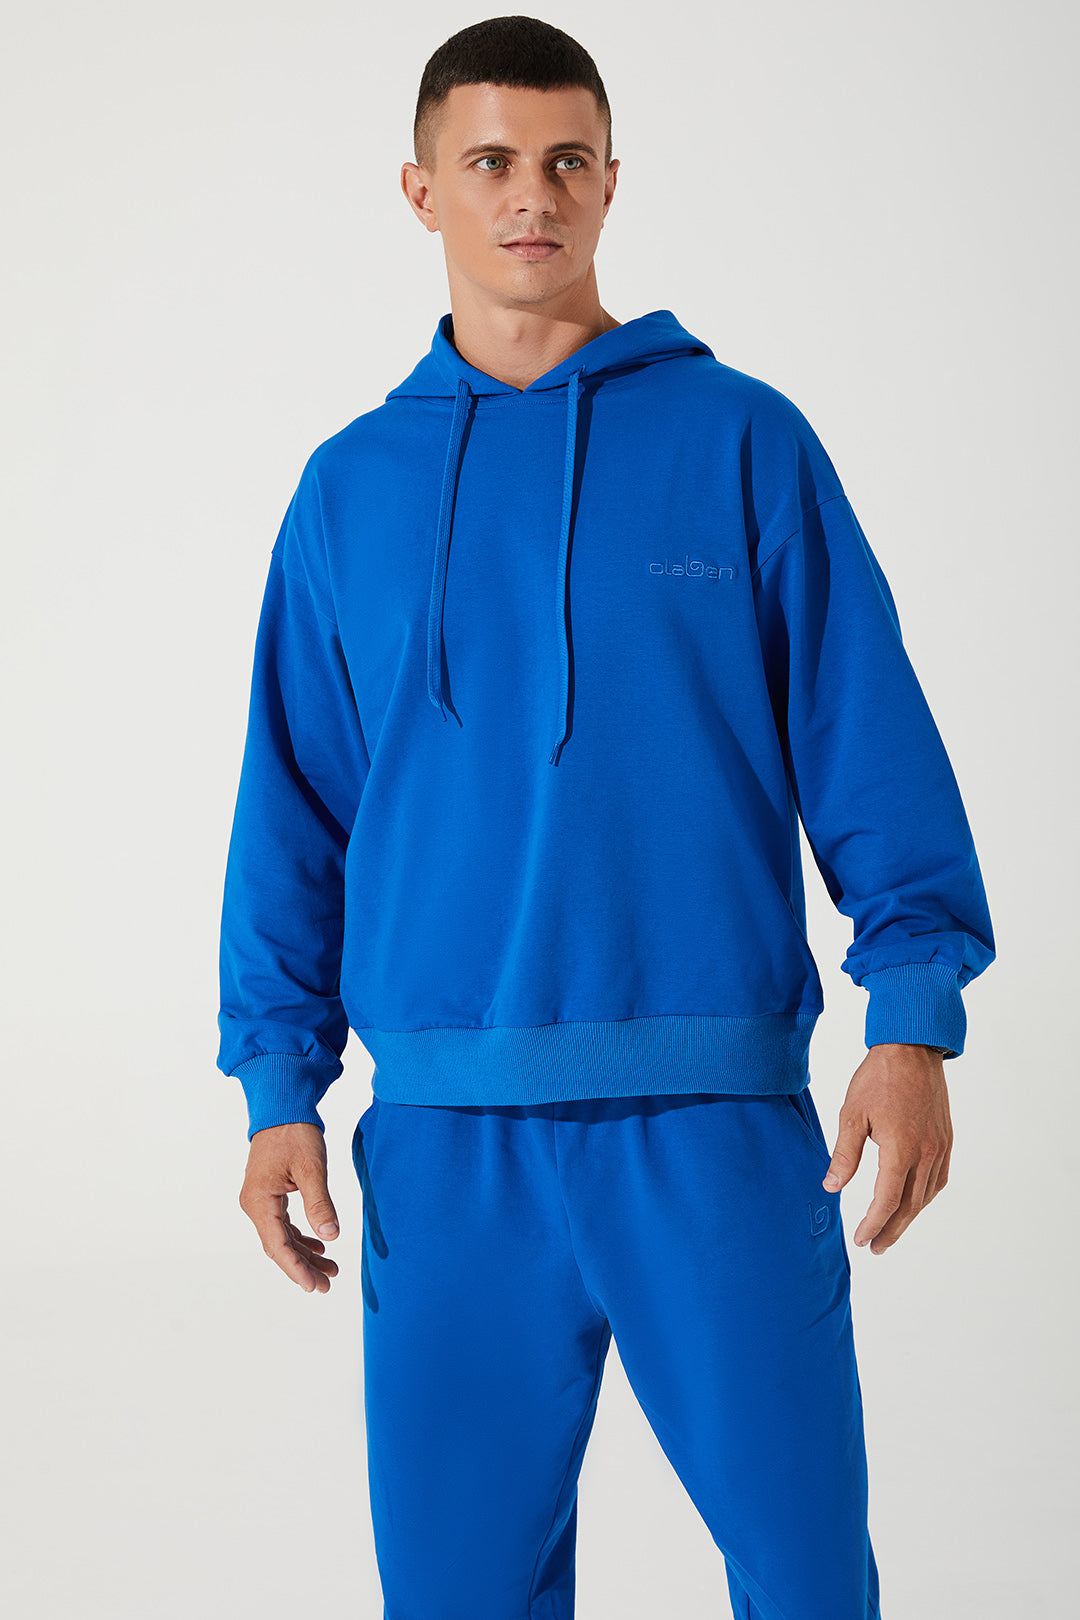 Men's hoodie in Atlantis blue, featuring a cropped design - OW-0033-MHO-BL.